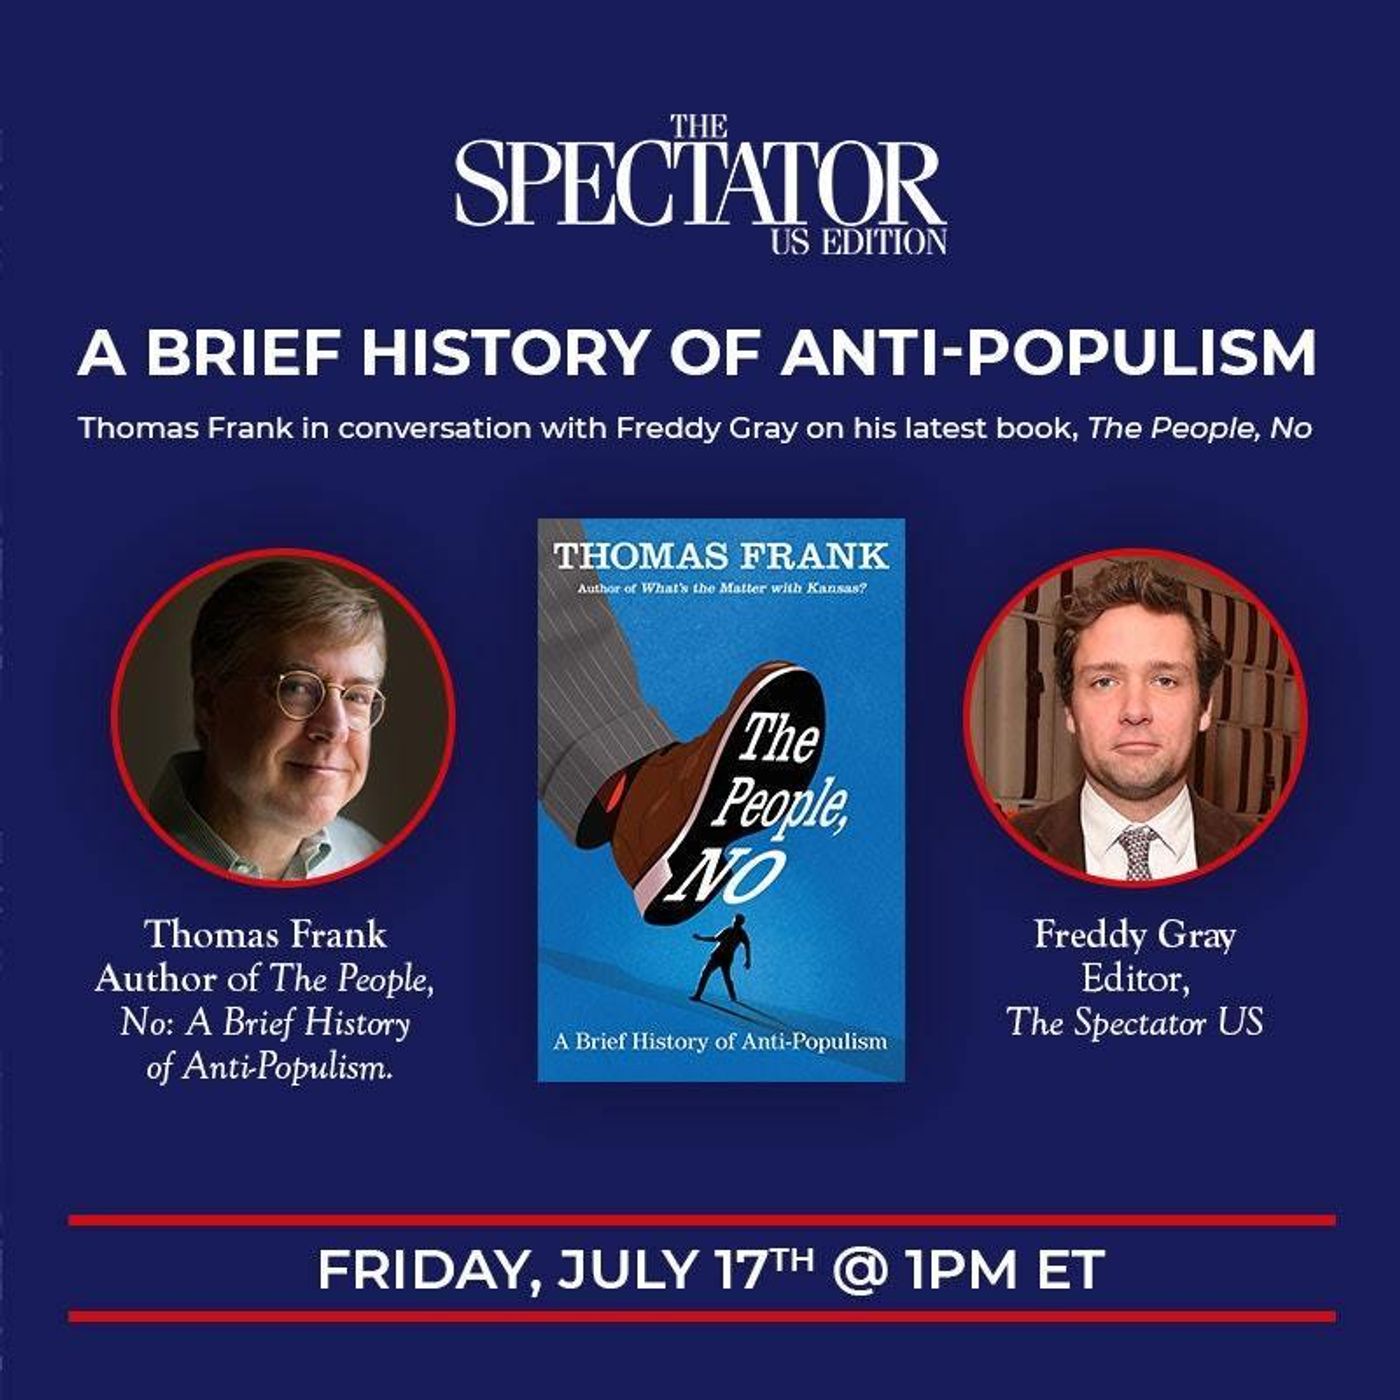 A brief history of anti-populism with Thomas Frank